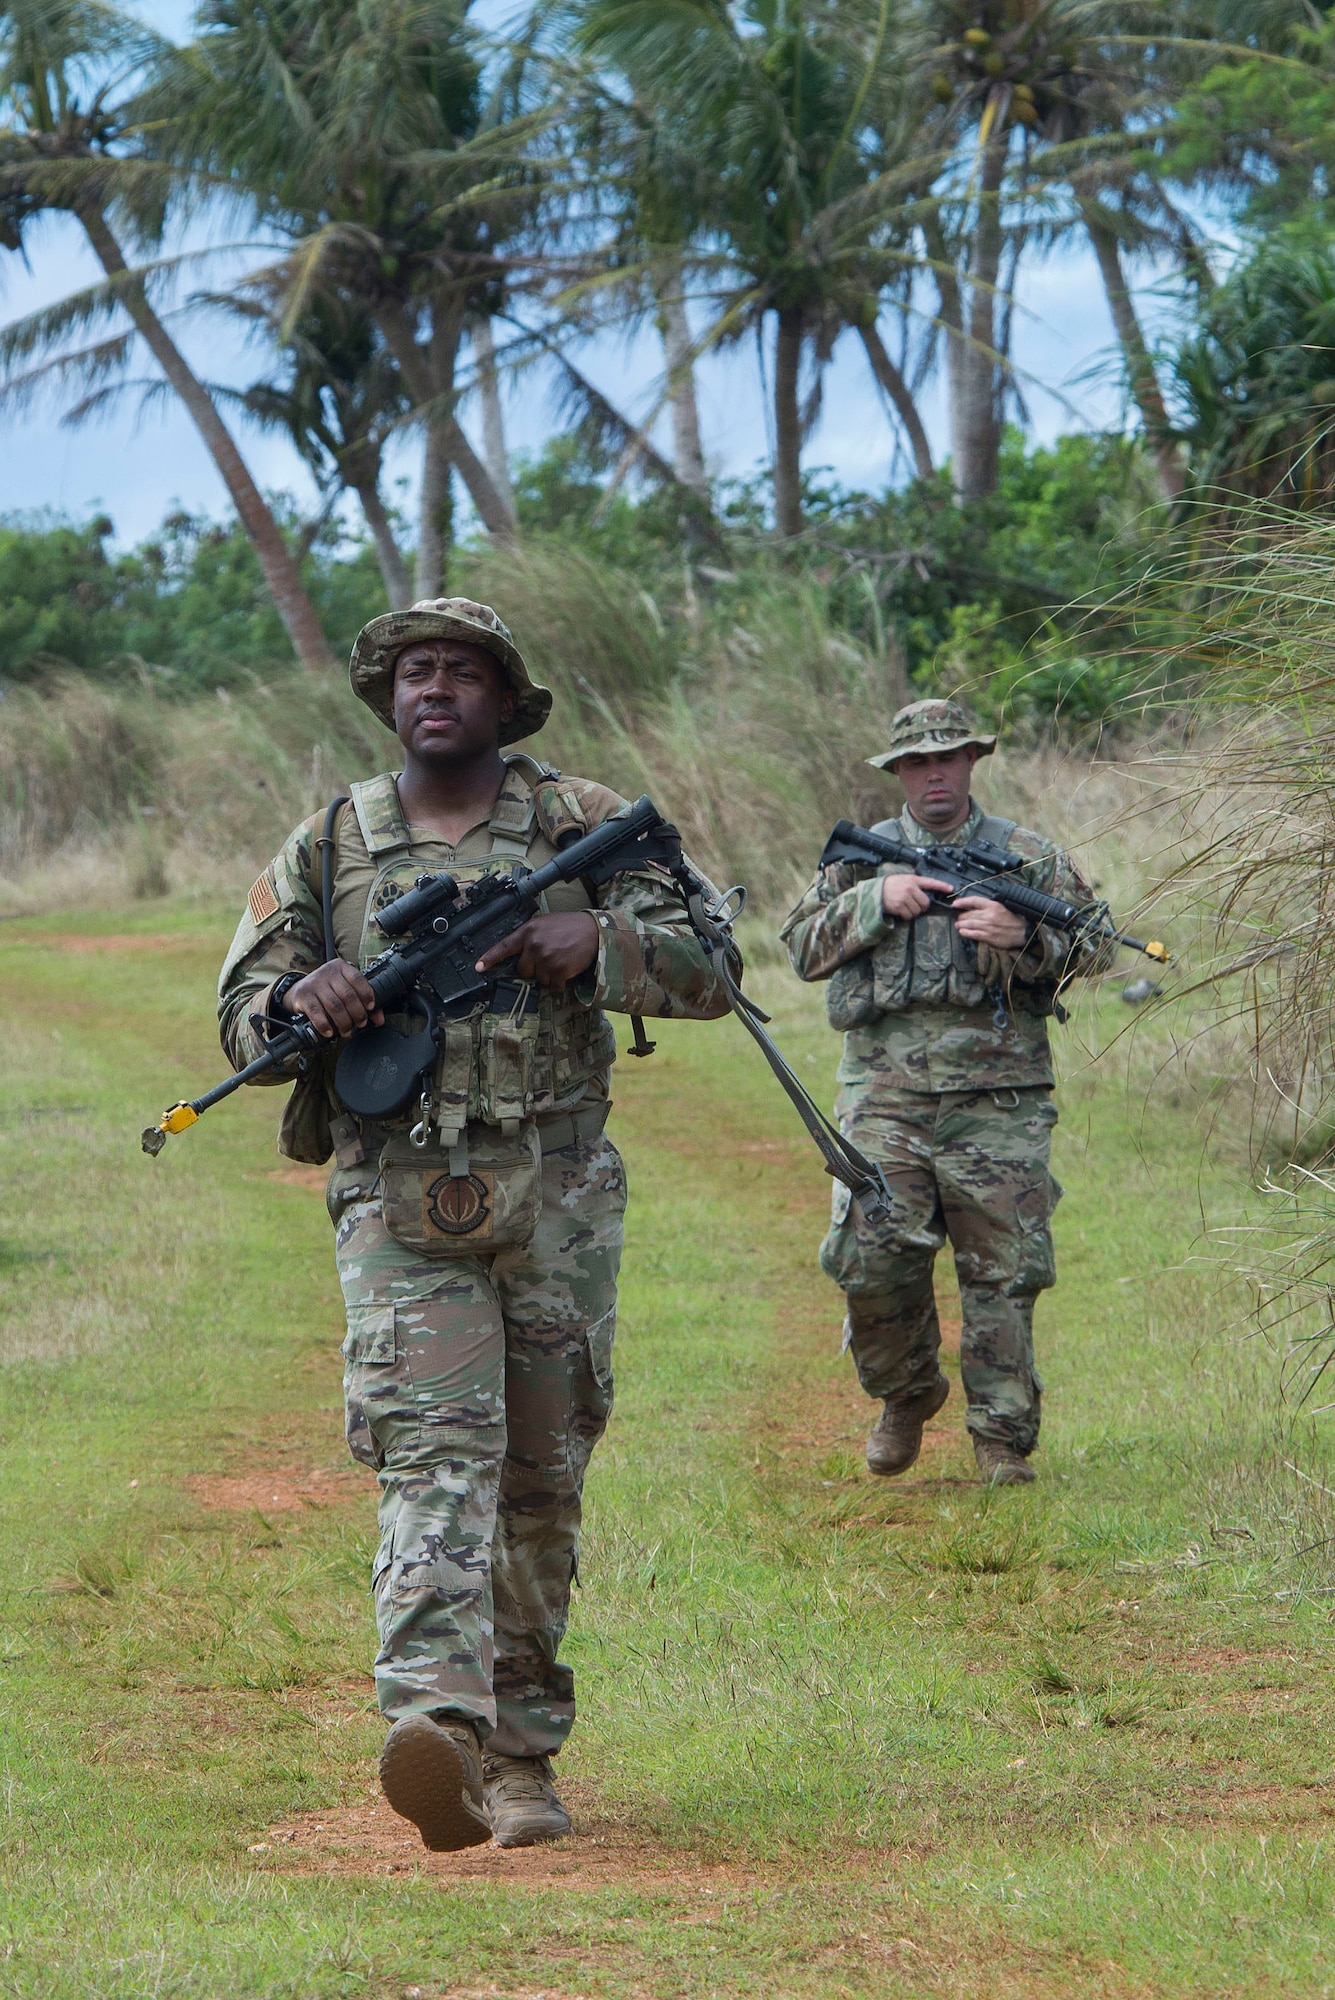 U.S. Air Force Tech. Sgt. Rowdy Spears, 736th Security Forces Squadron noncommissioned officer in charge of standards and evaluations, approaches a training scenario during Pacific Defender 20-1 at the Pacific Regional Training Center near Andersen Air Force Base, Guam, Feb. 10, 2020.